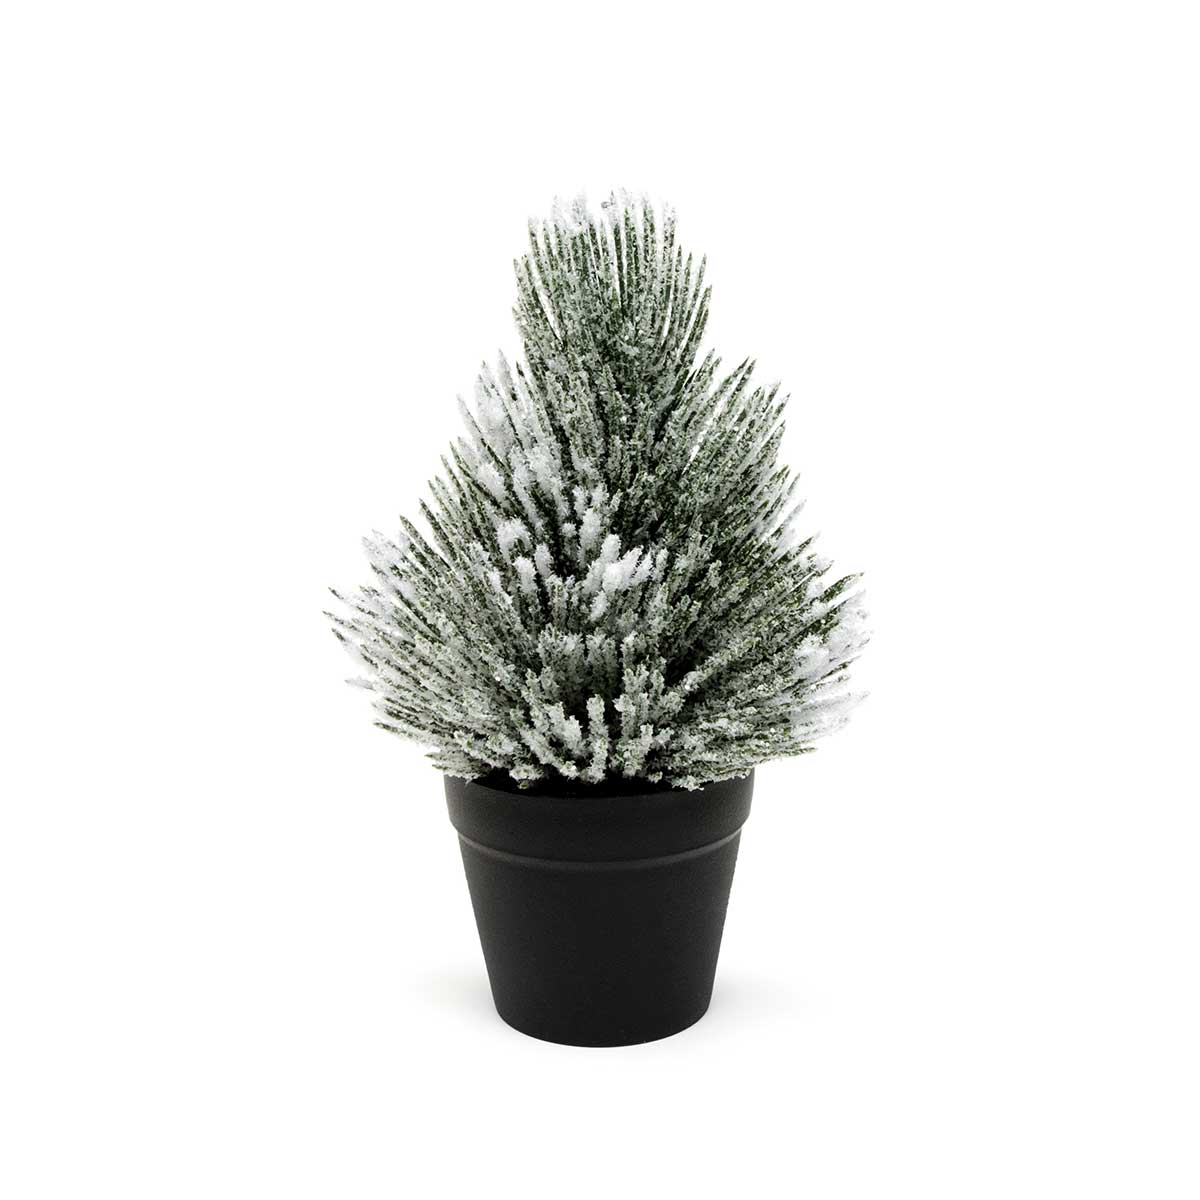 TREE PINE WITH SNOW SMALL 5IN X 8IN IN BLACK POT PLASTIC